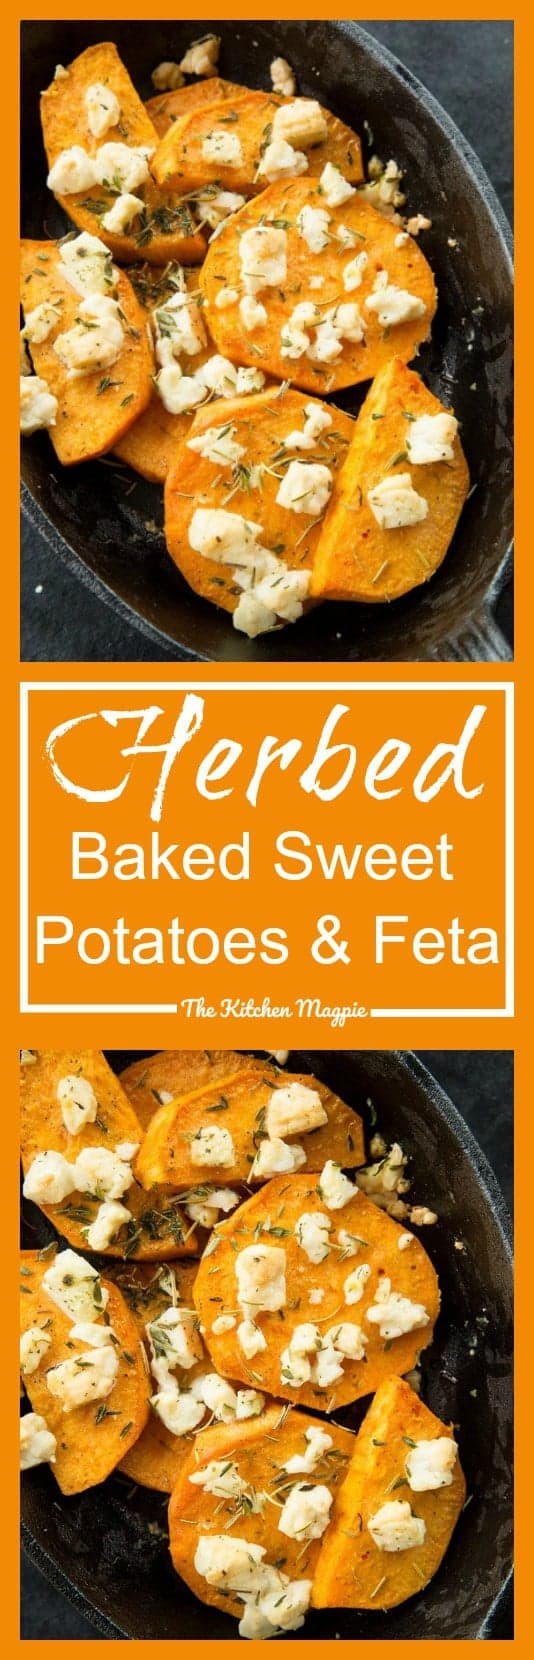 Baked Herbed Sweet Potatoes & Feta - The Kitchen Magpie